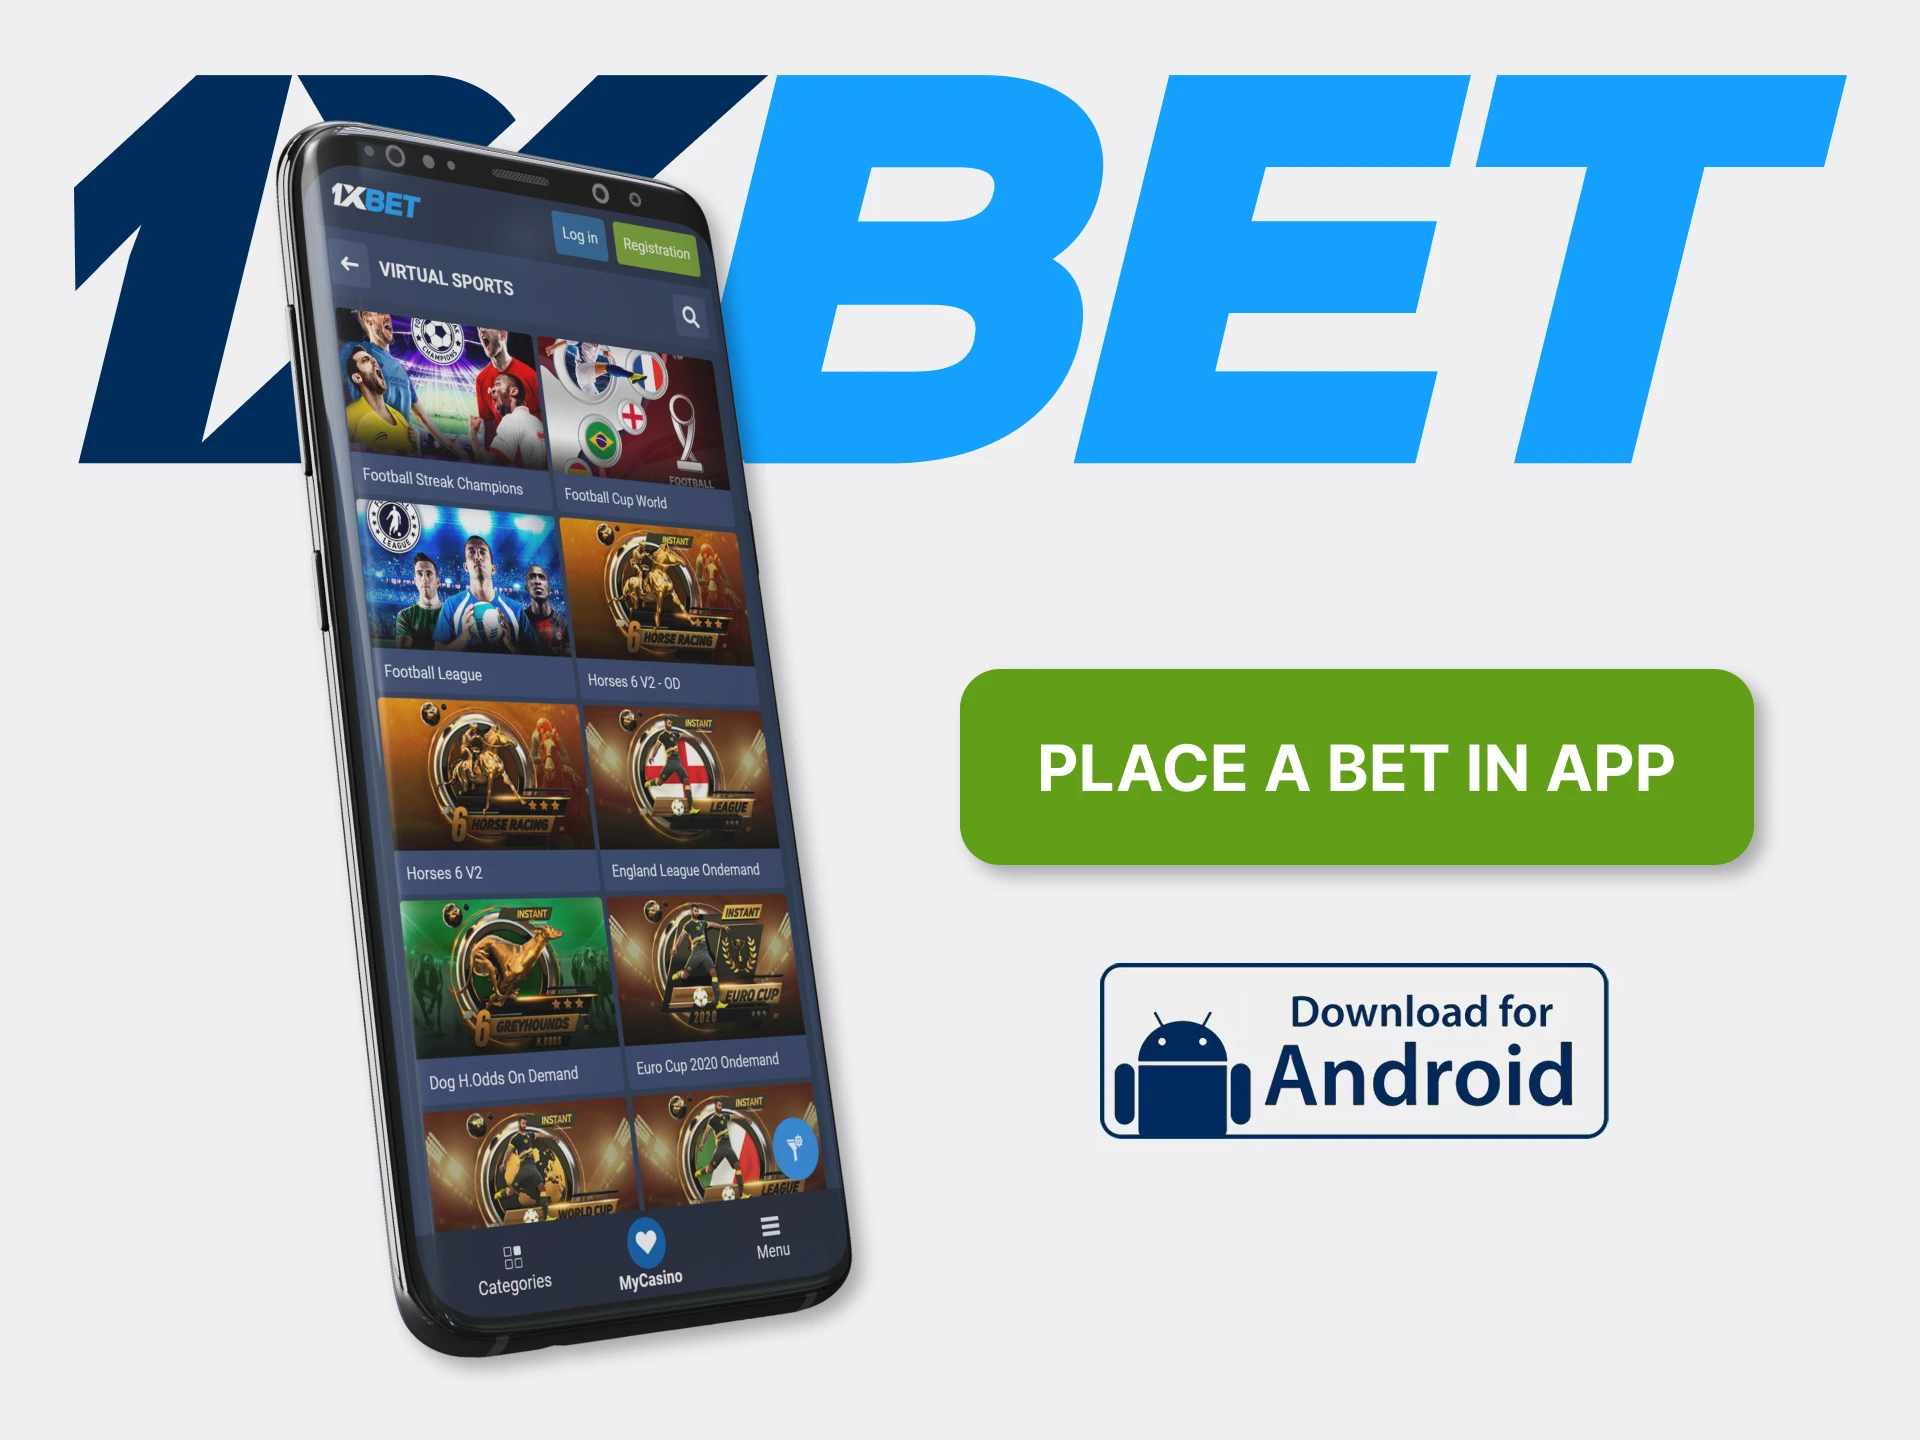 Bet on virtual sports with the 1xBet app on your Android phone.